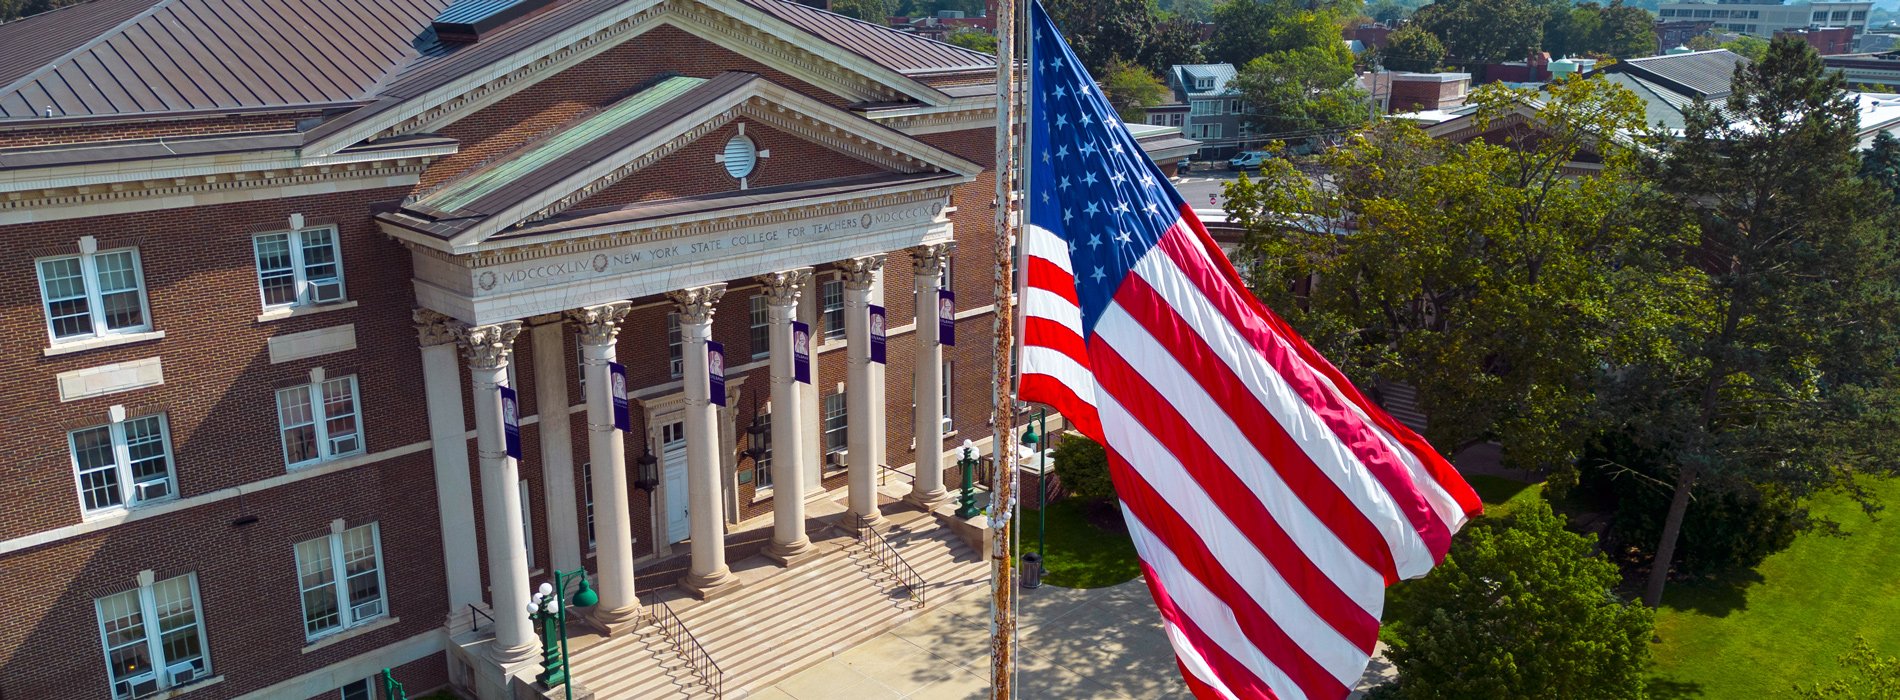 Downtown Campus of University at Albany with US flag in foreground